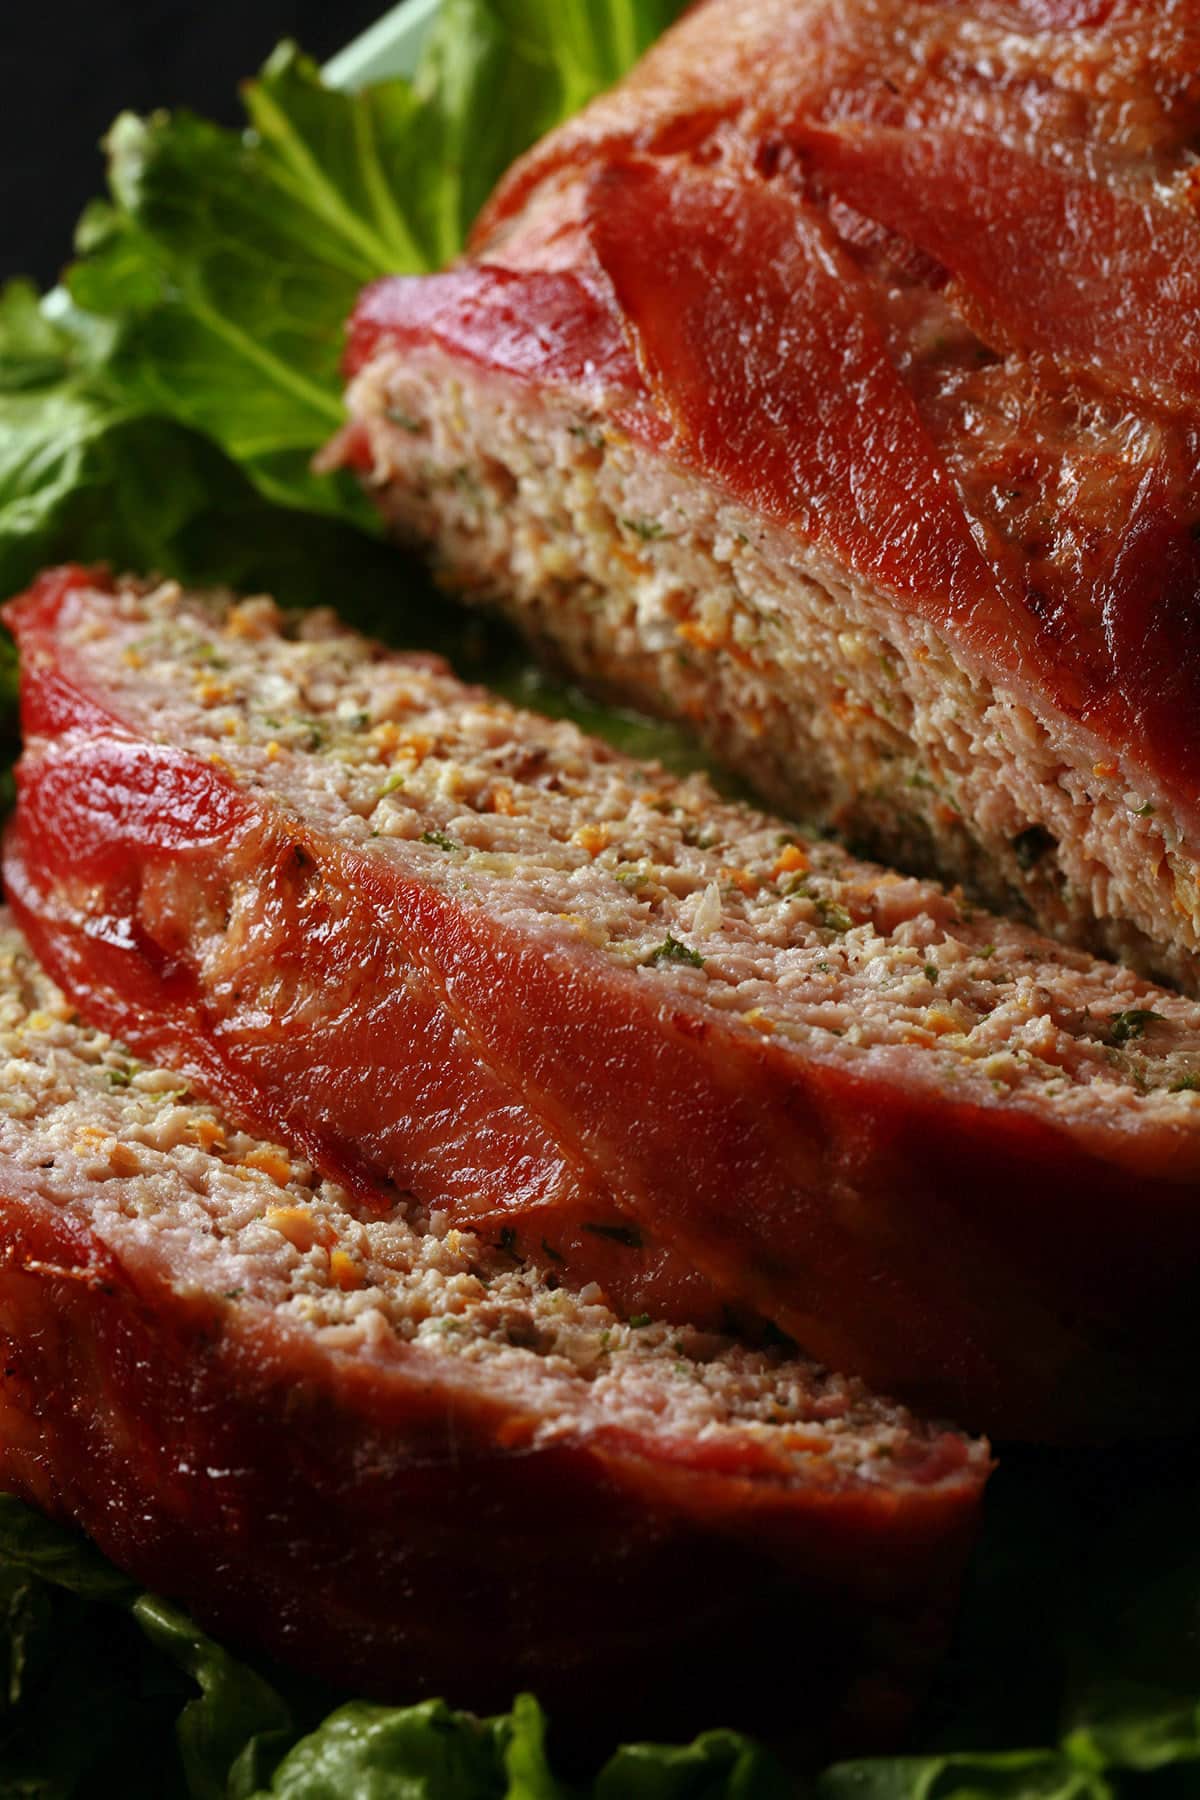 A close up view of a keto bacon wrapped meatloaf.  Shredded veggies are visible.